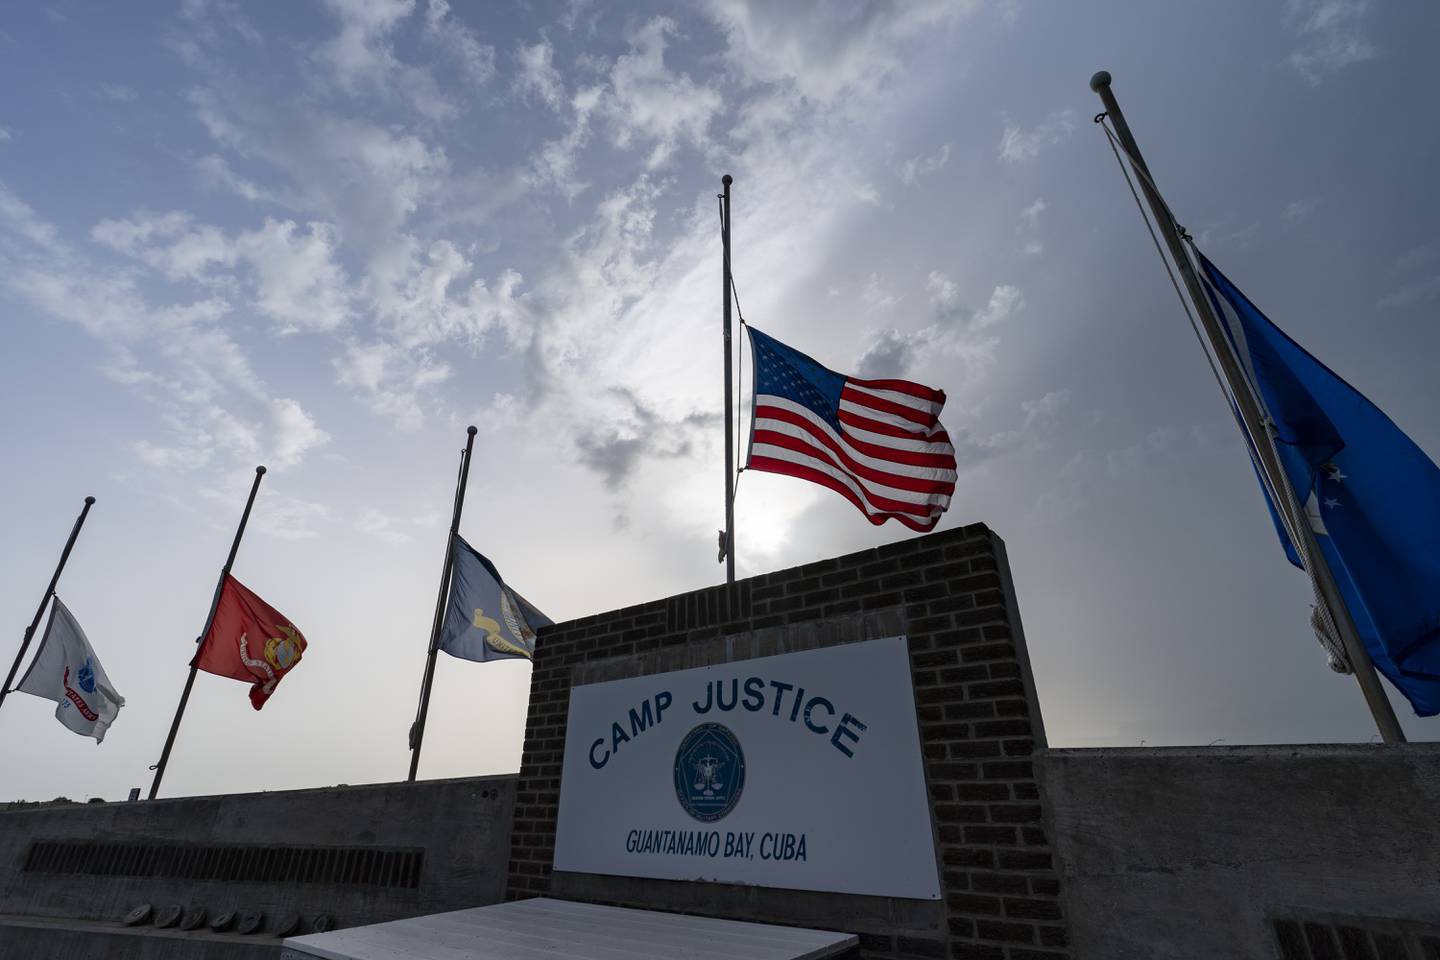 FILE - In this photo reviewed by U.S. military officials, flags fly at half-staff at Camp Justice, Aug. 29, 2021, in Guantanamo Bay Naval Base, Cuba. Majid Khan, the onetime courier for al-Qaida is a free man after serving more than 16 years at Guantanamo, and surviving torture at notorious CIA "black sites." The Pentagon announced the release of Pakistan citizen Khan on Thursday, Feb. 2, 2023. Khan is now in Belize, after that nation reached agreement with the Biden administration to take him.